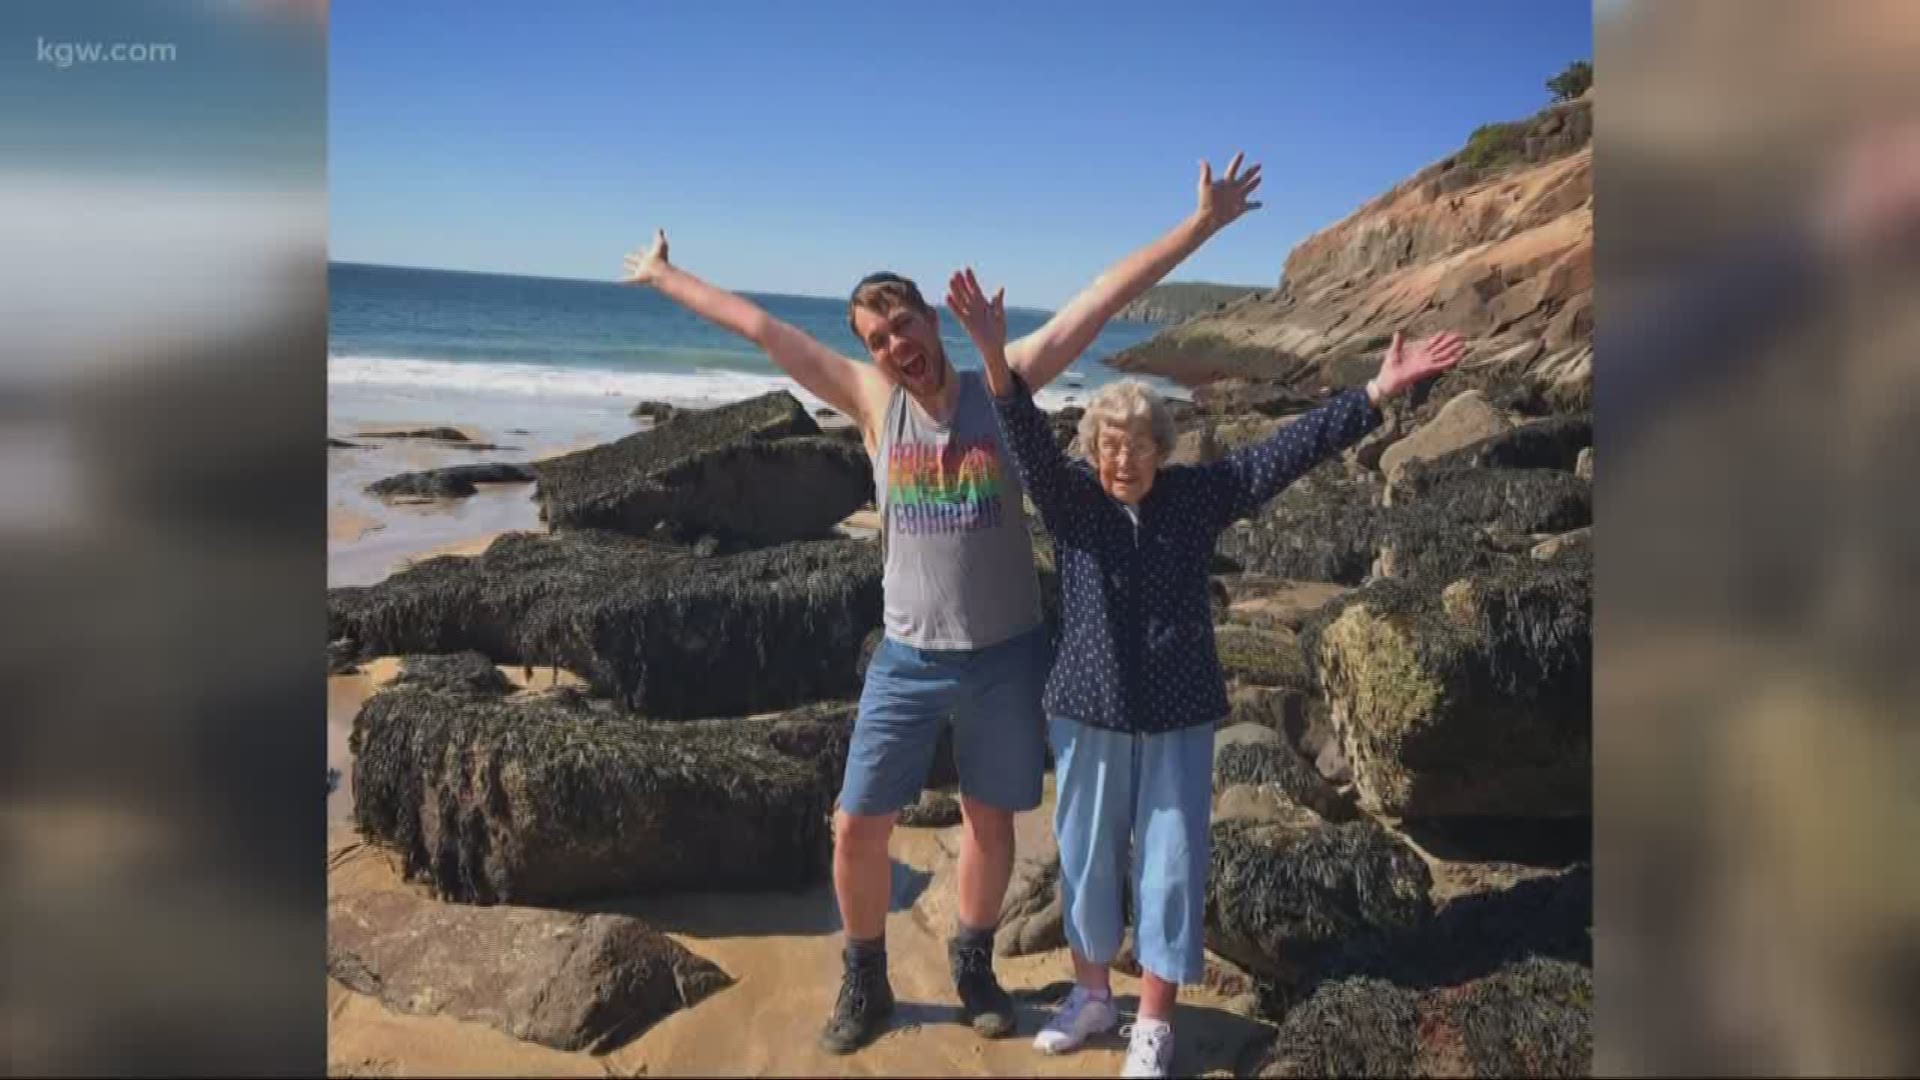 Brad Ryan is taking his 89-year-old grandmother Joy to all 61 US national parks. The pair stopped by Portland, Ore. in October right before heading out to California